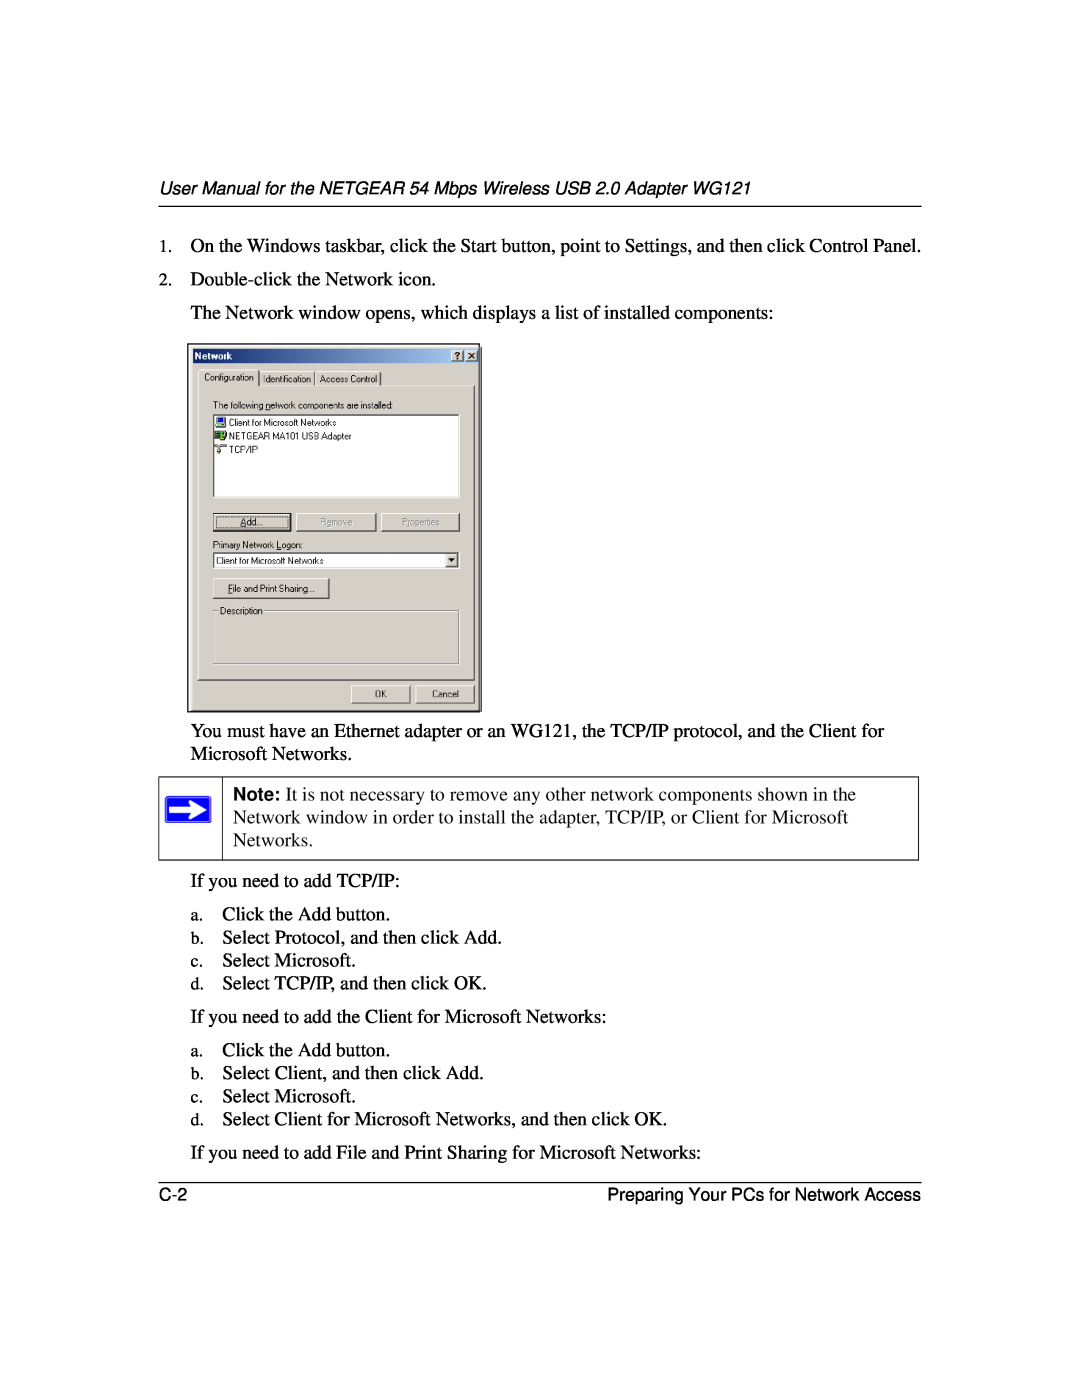 NETGEAR WG121 user manual Double-click the Network icon 